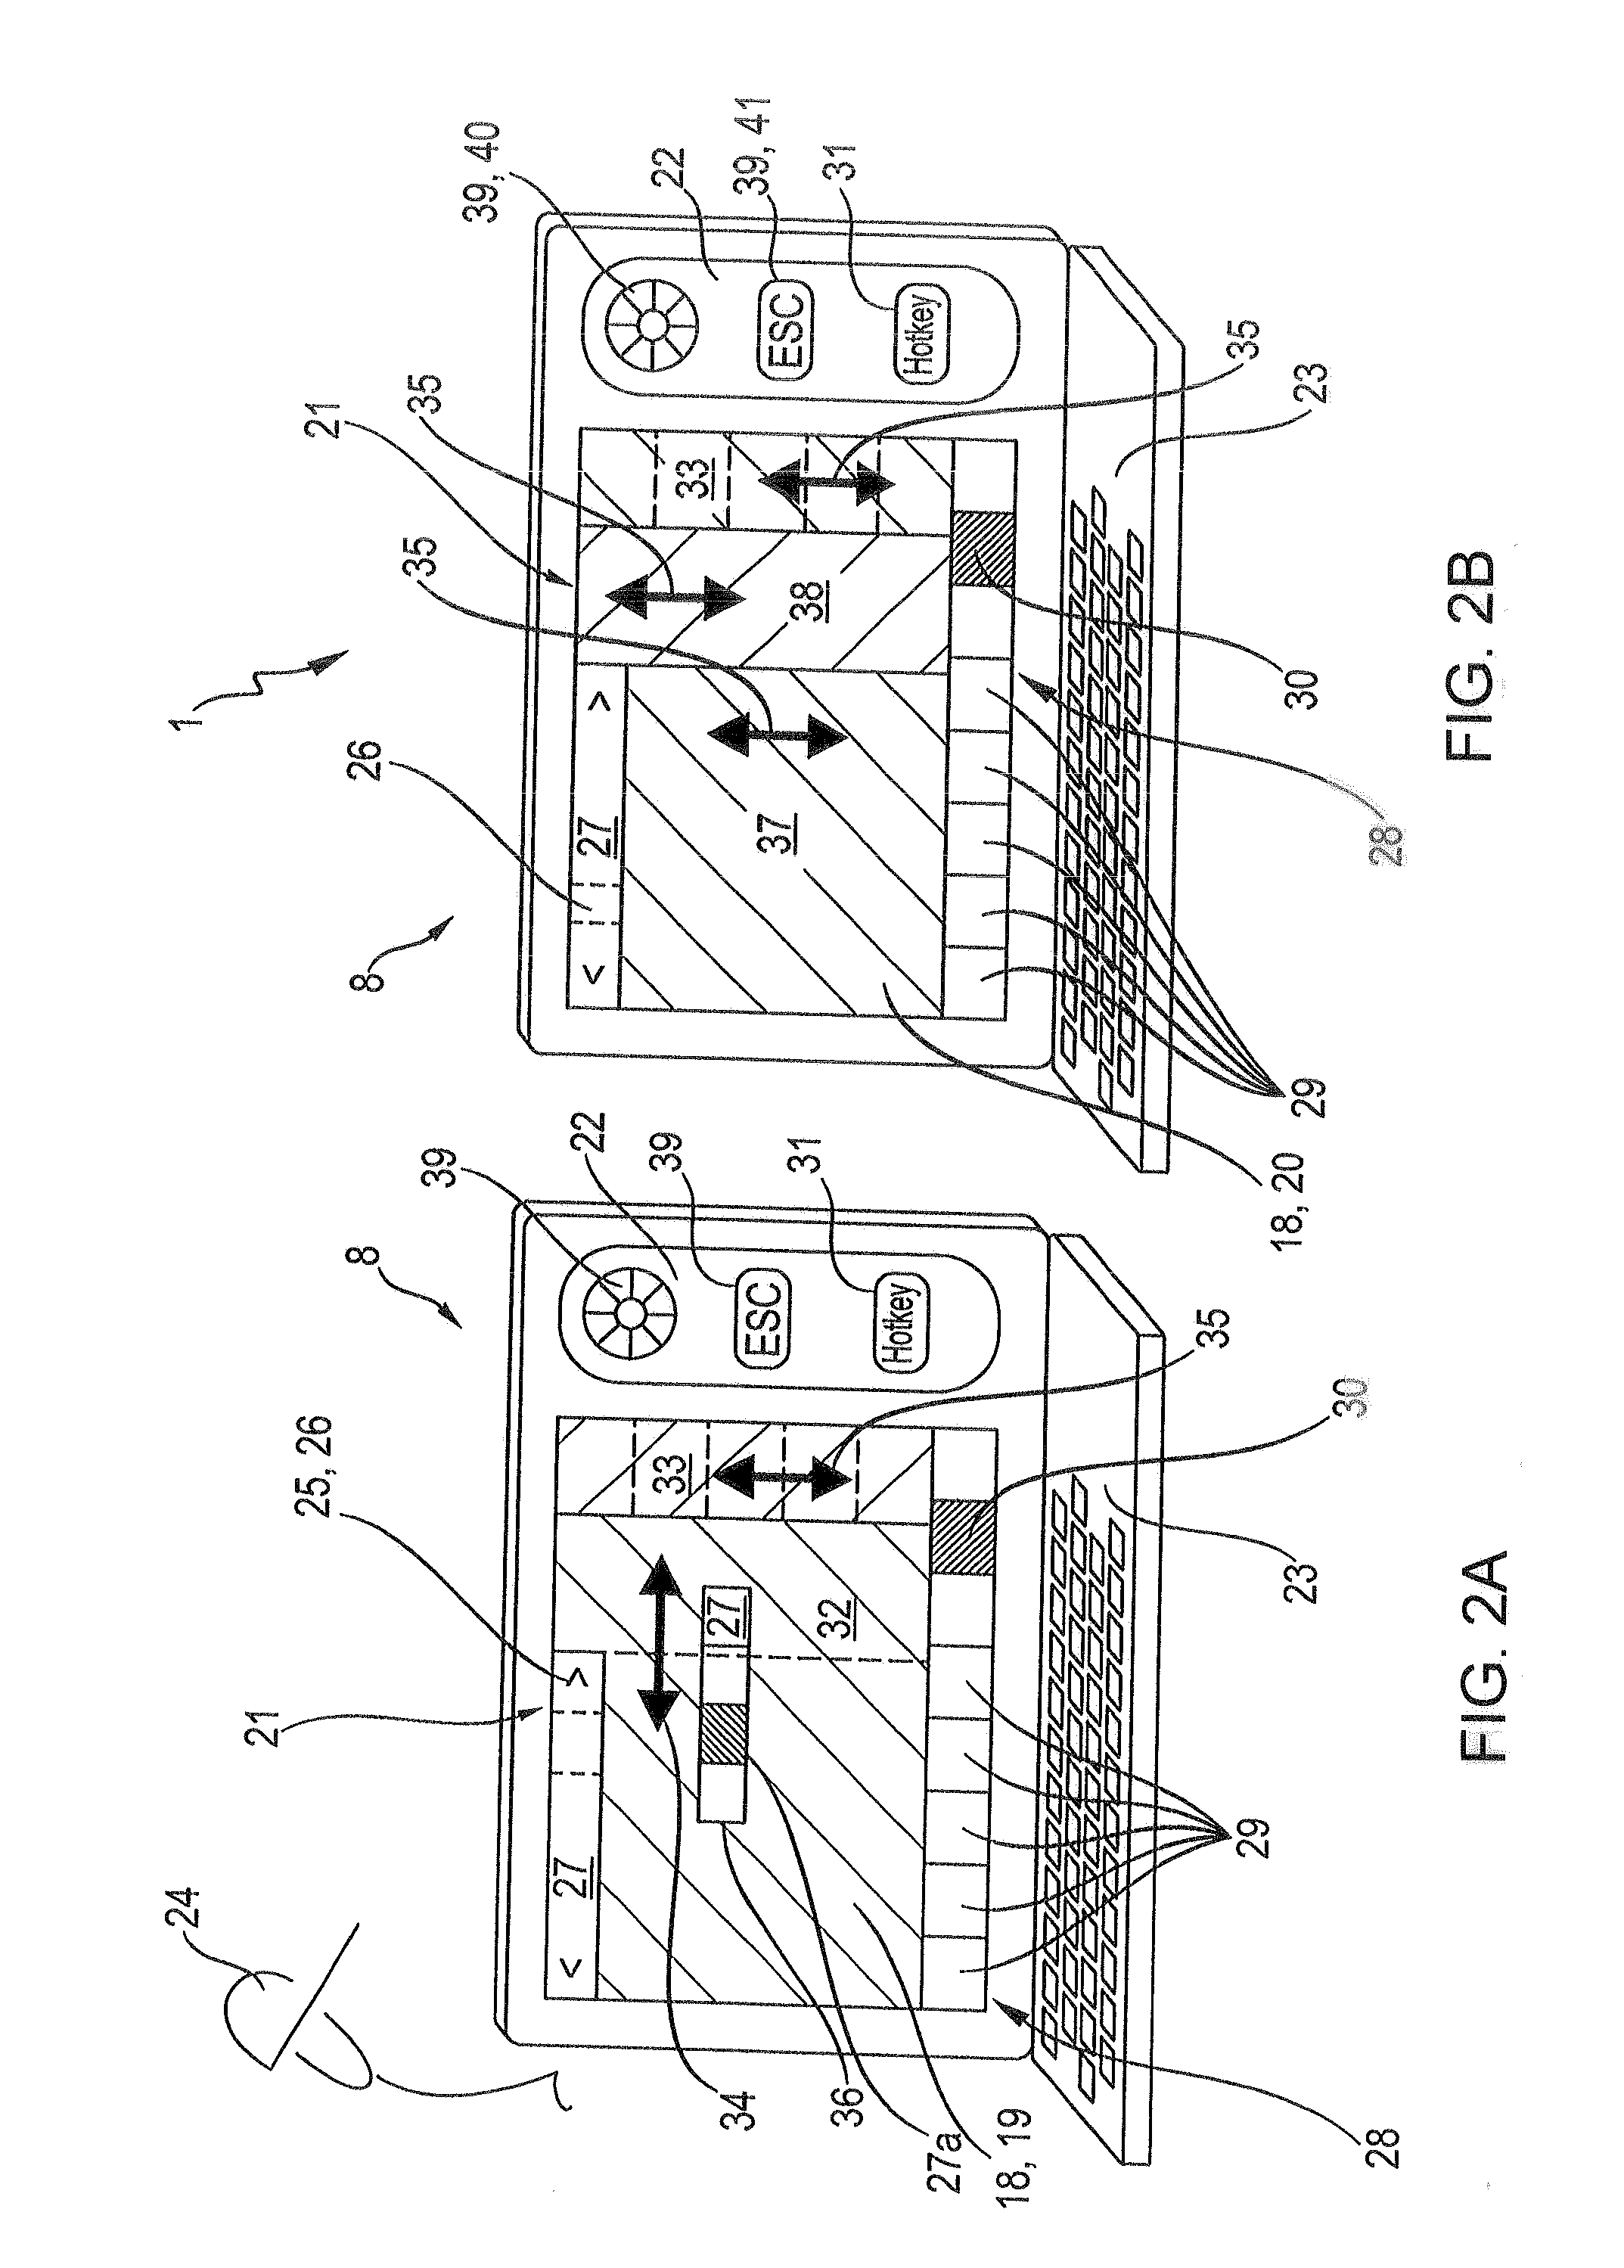 Electronic control and display unit